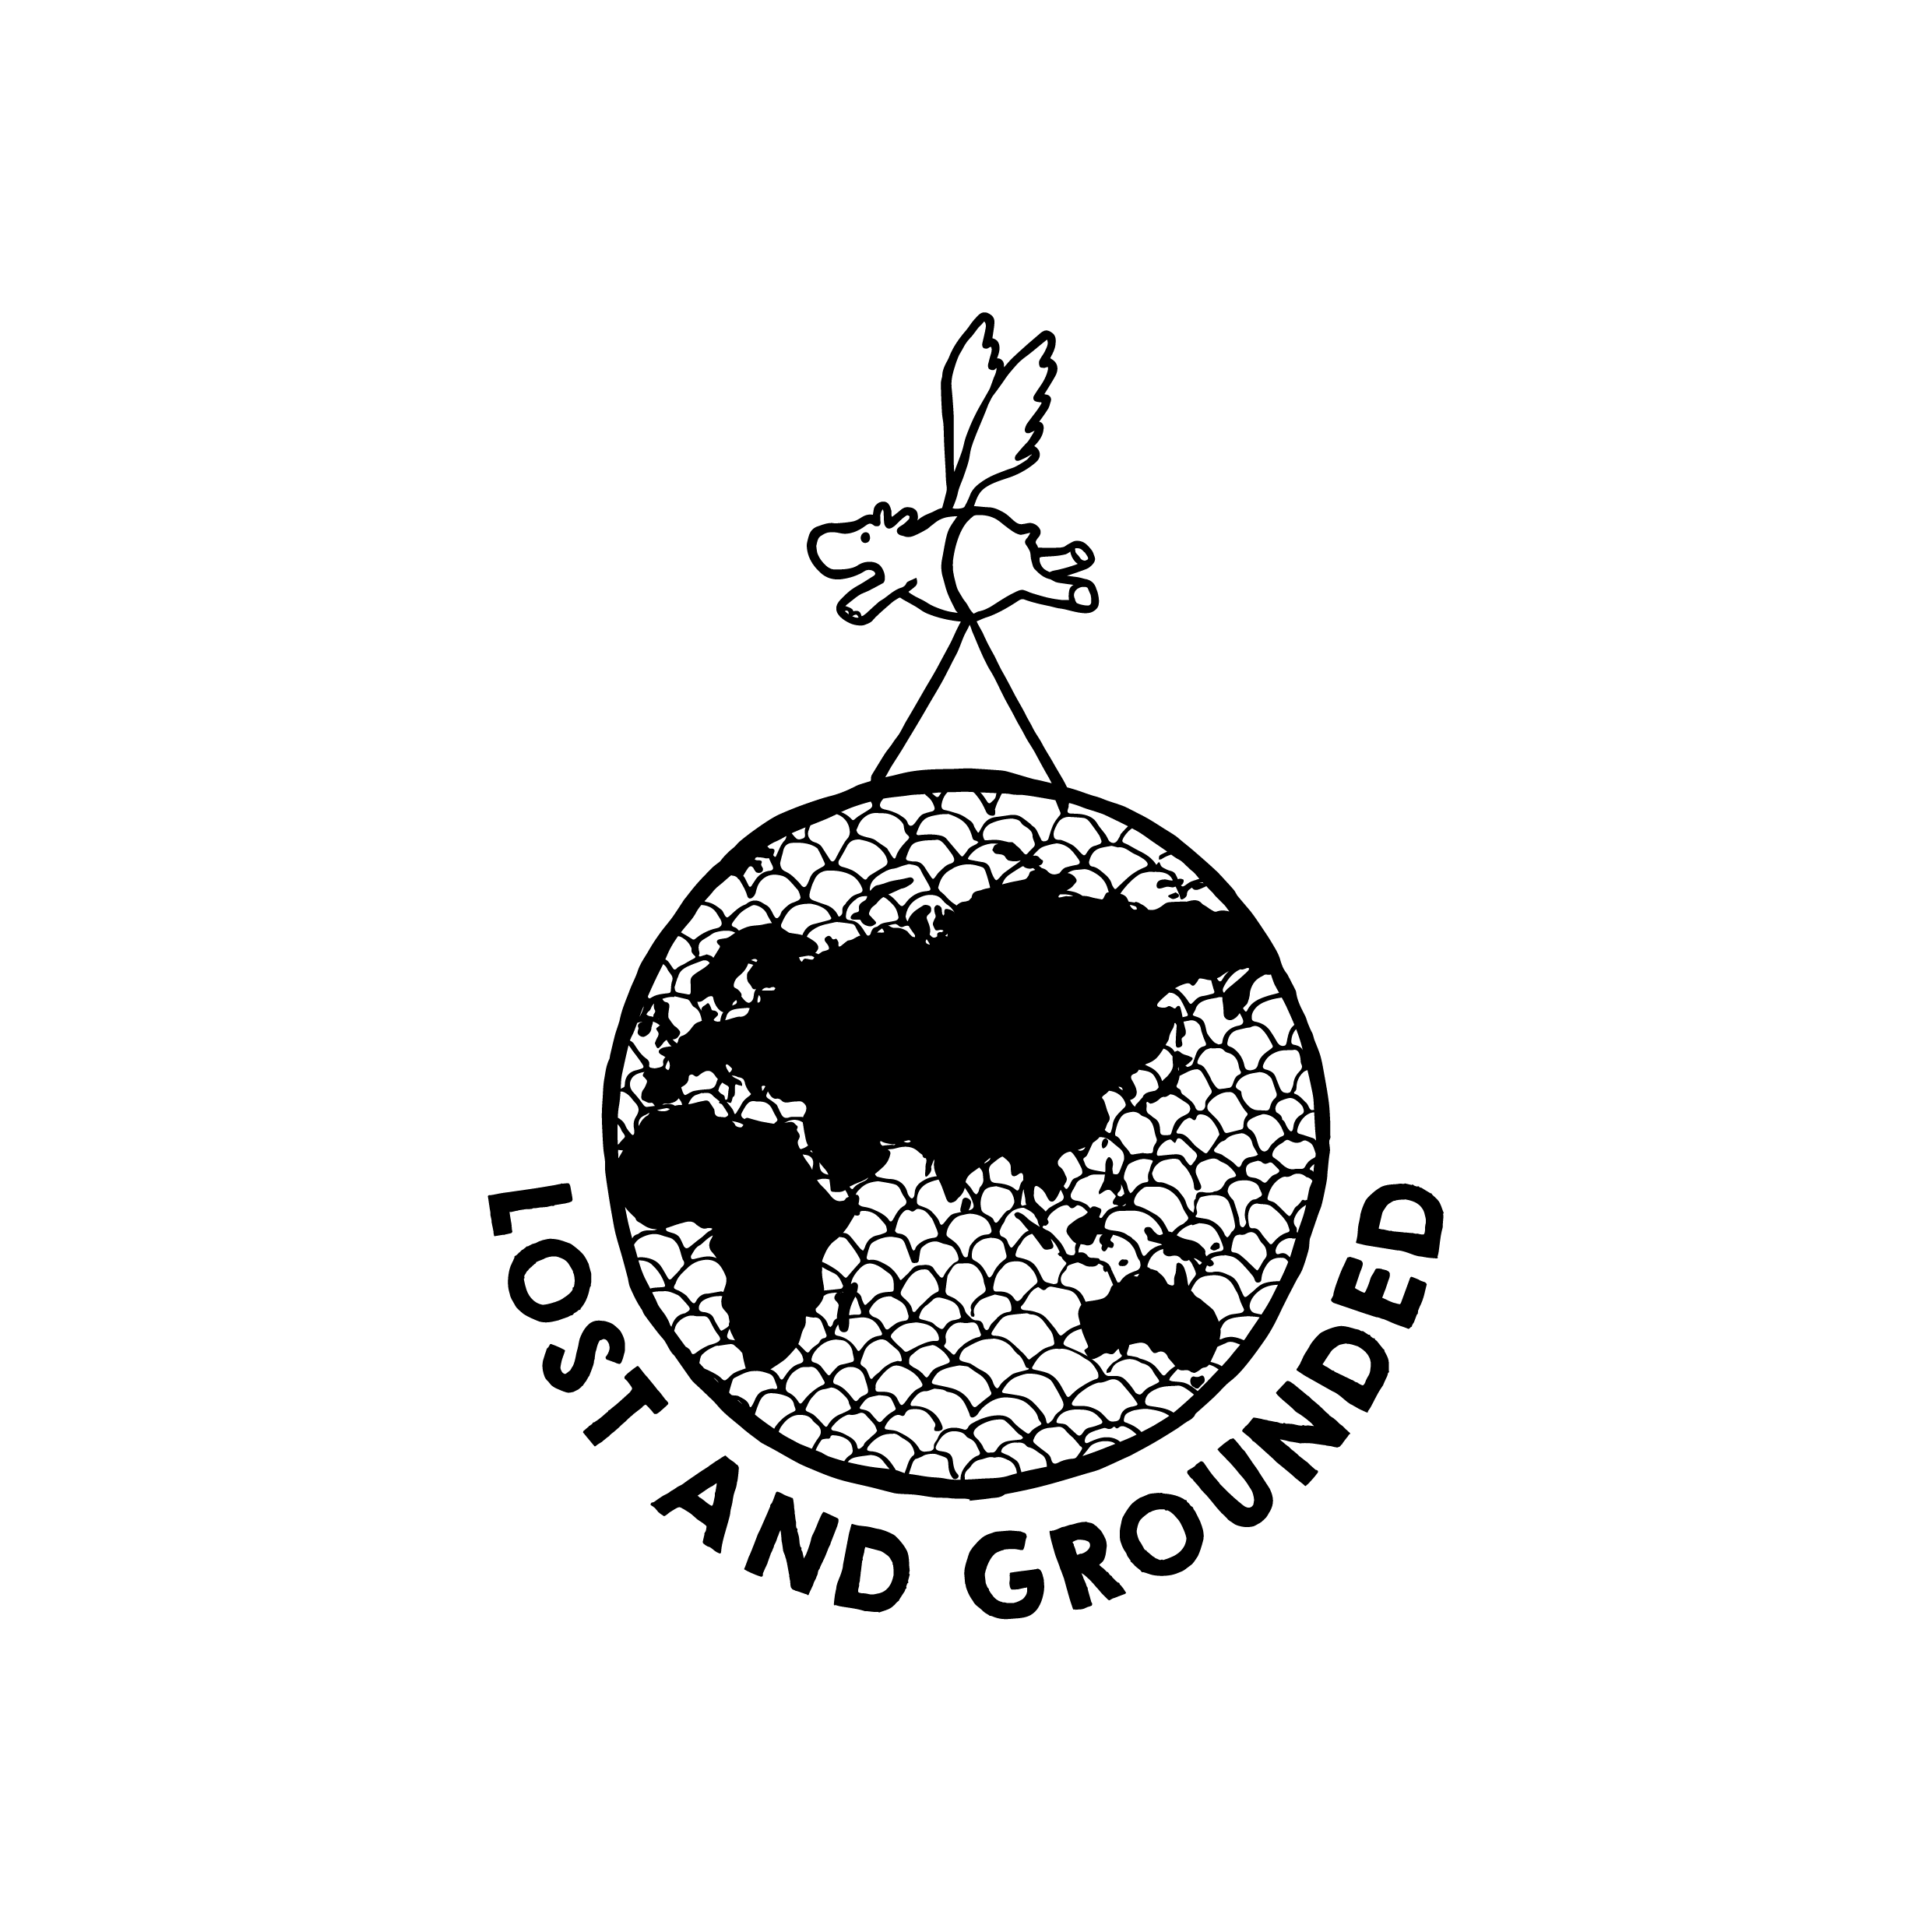 Lost and Grounded